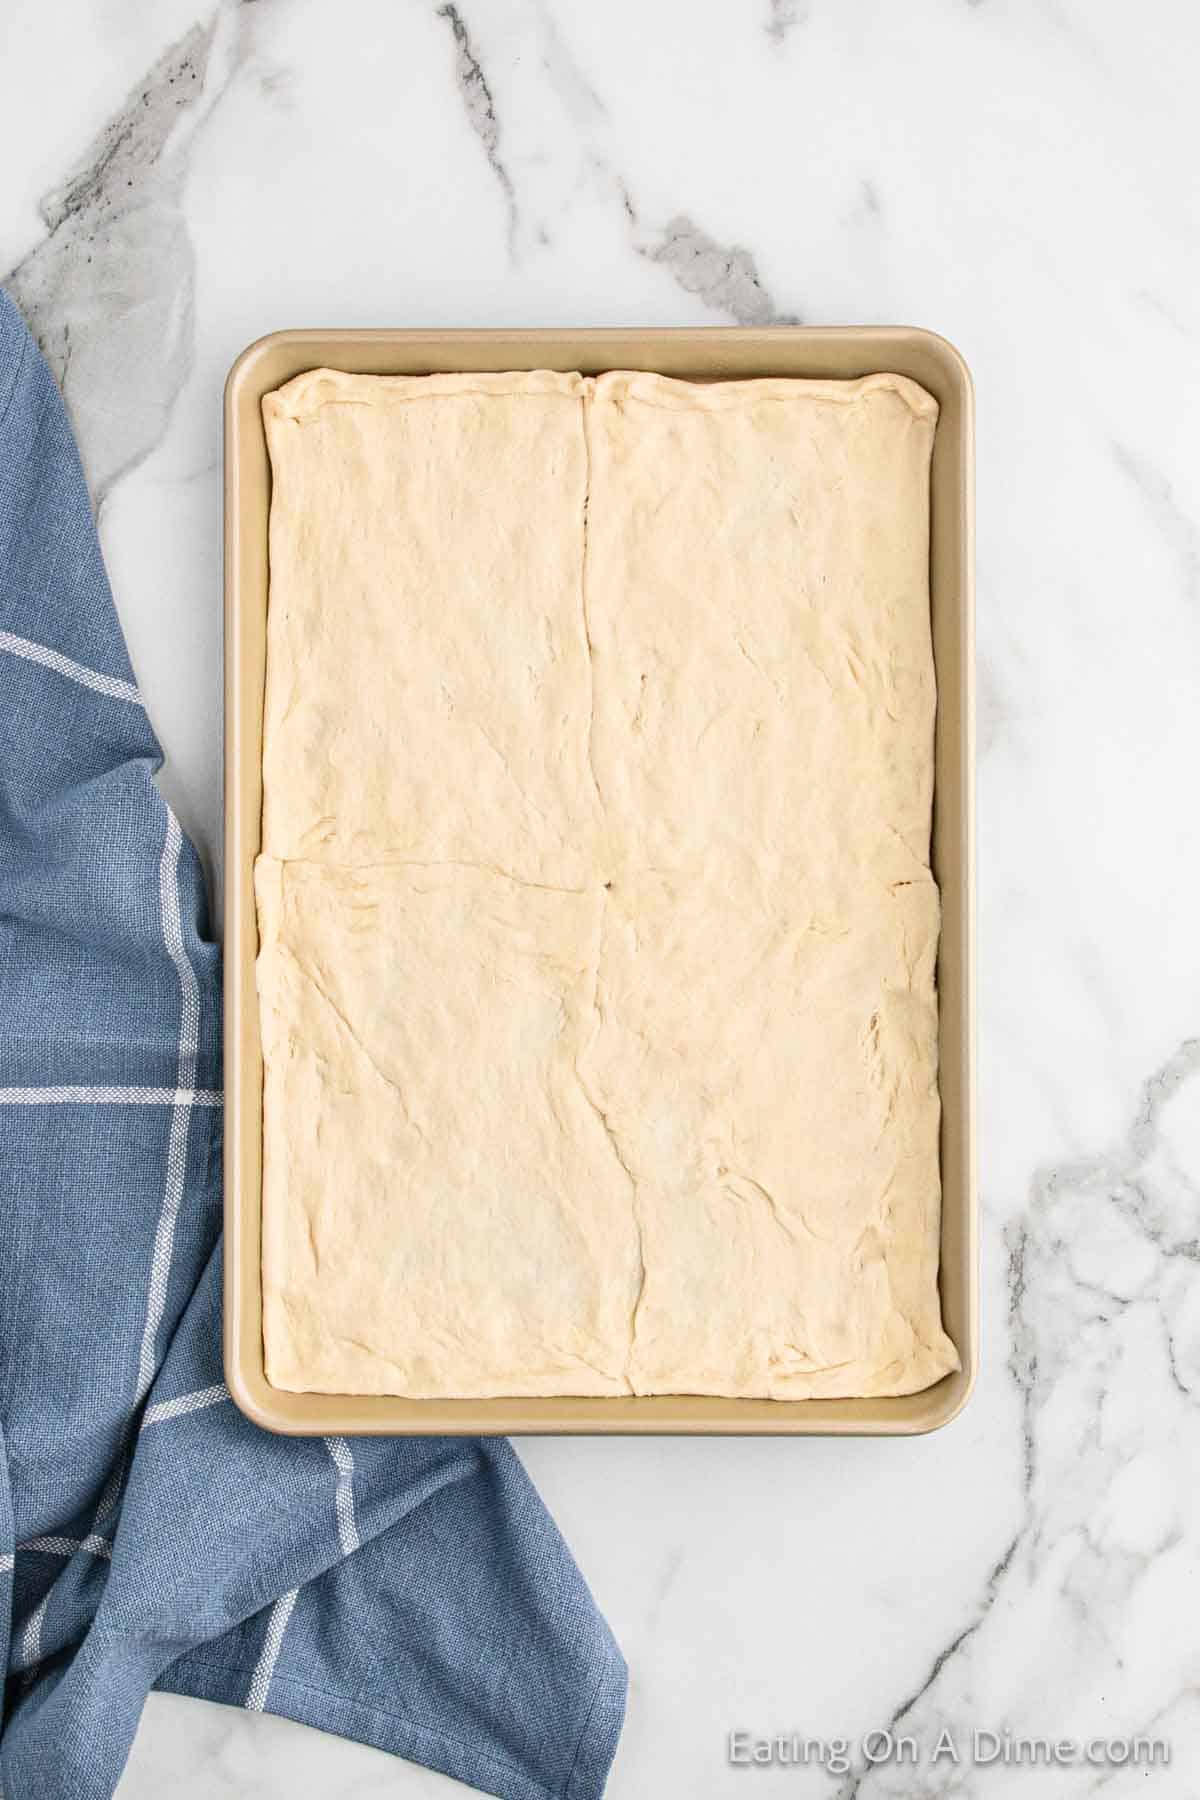 Crescent Roll dough pressed onto baking sheet